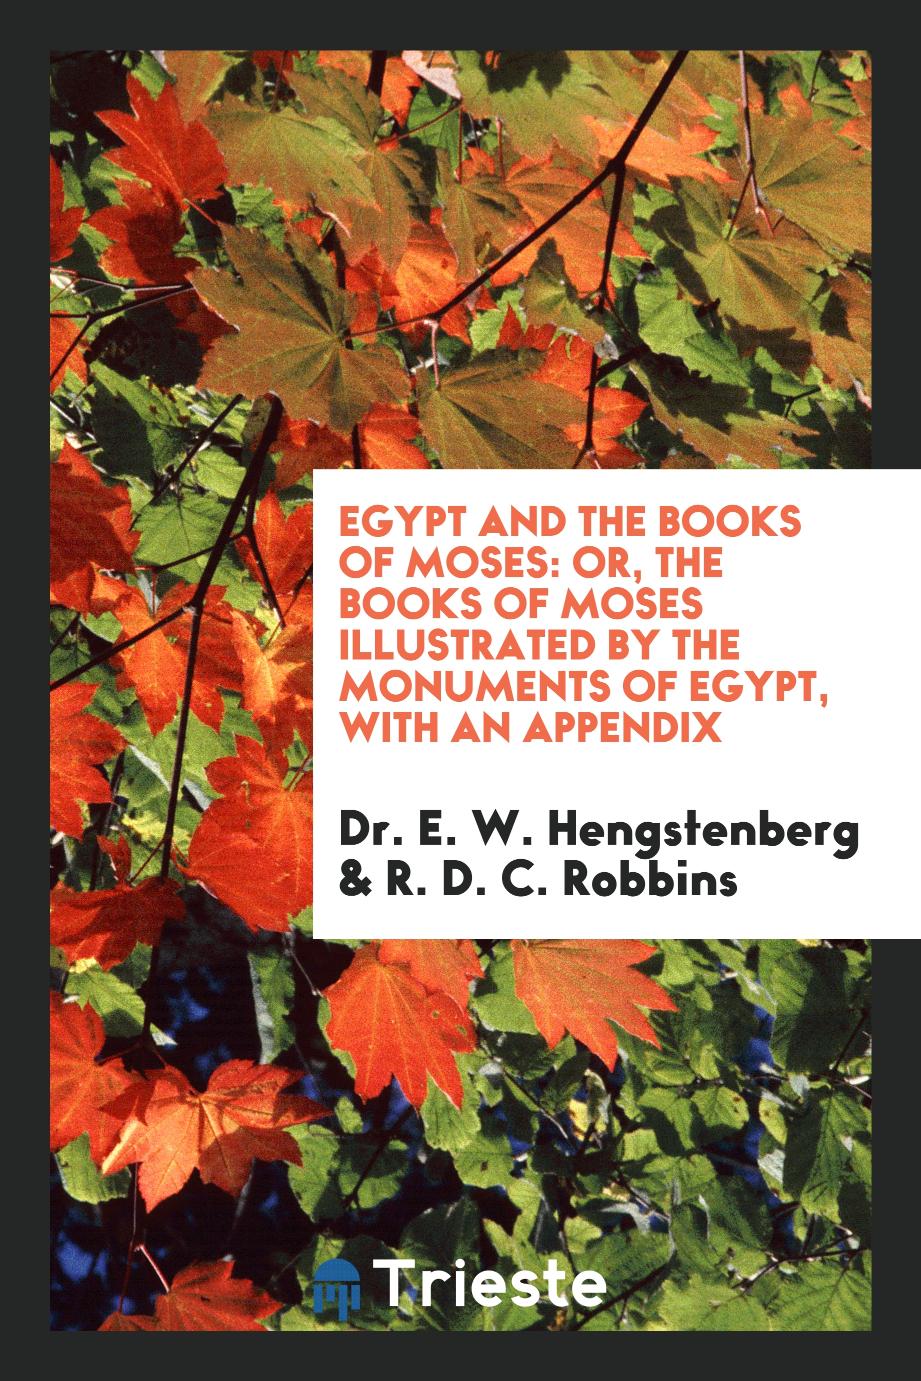 Egypt and the Books of Moses: Or, The Books of Moses Illustrated by the Monuments of Egypt, with an Appendix